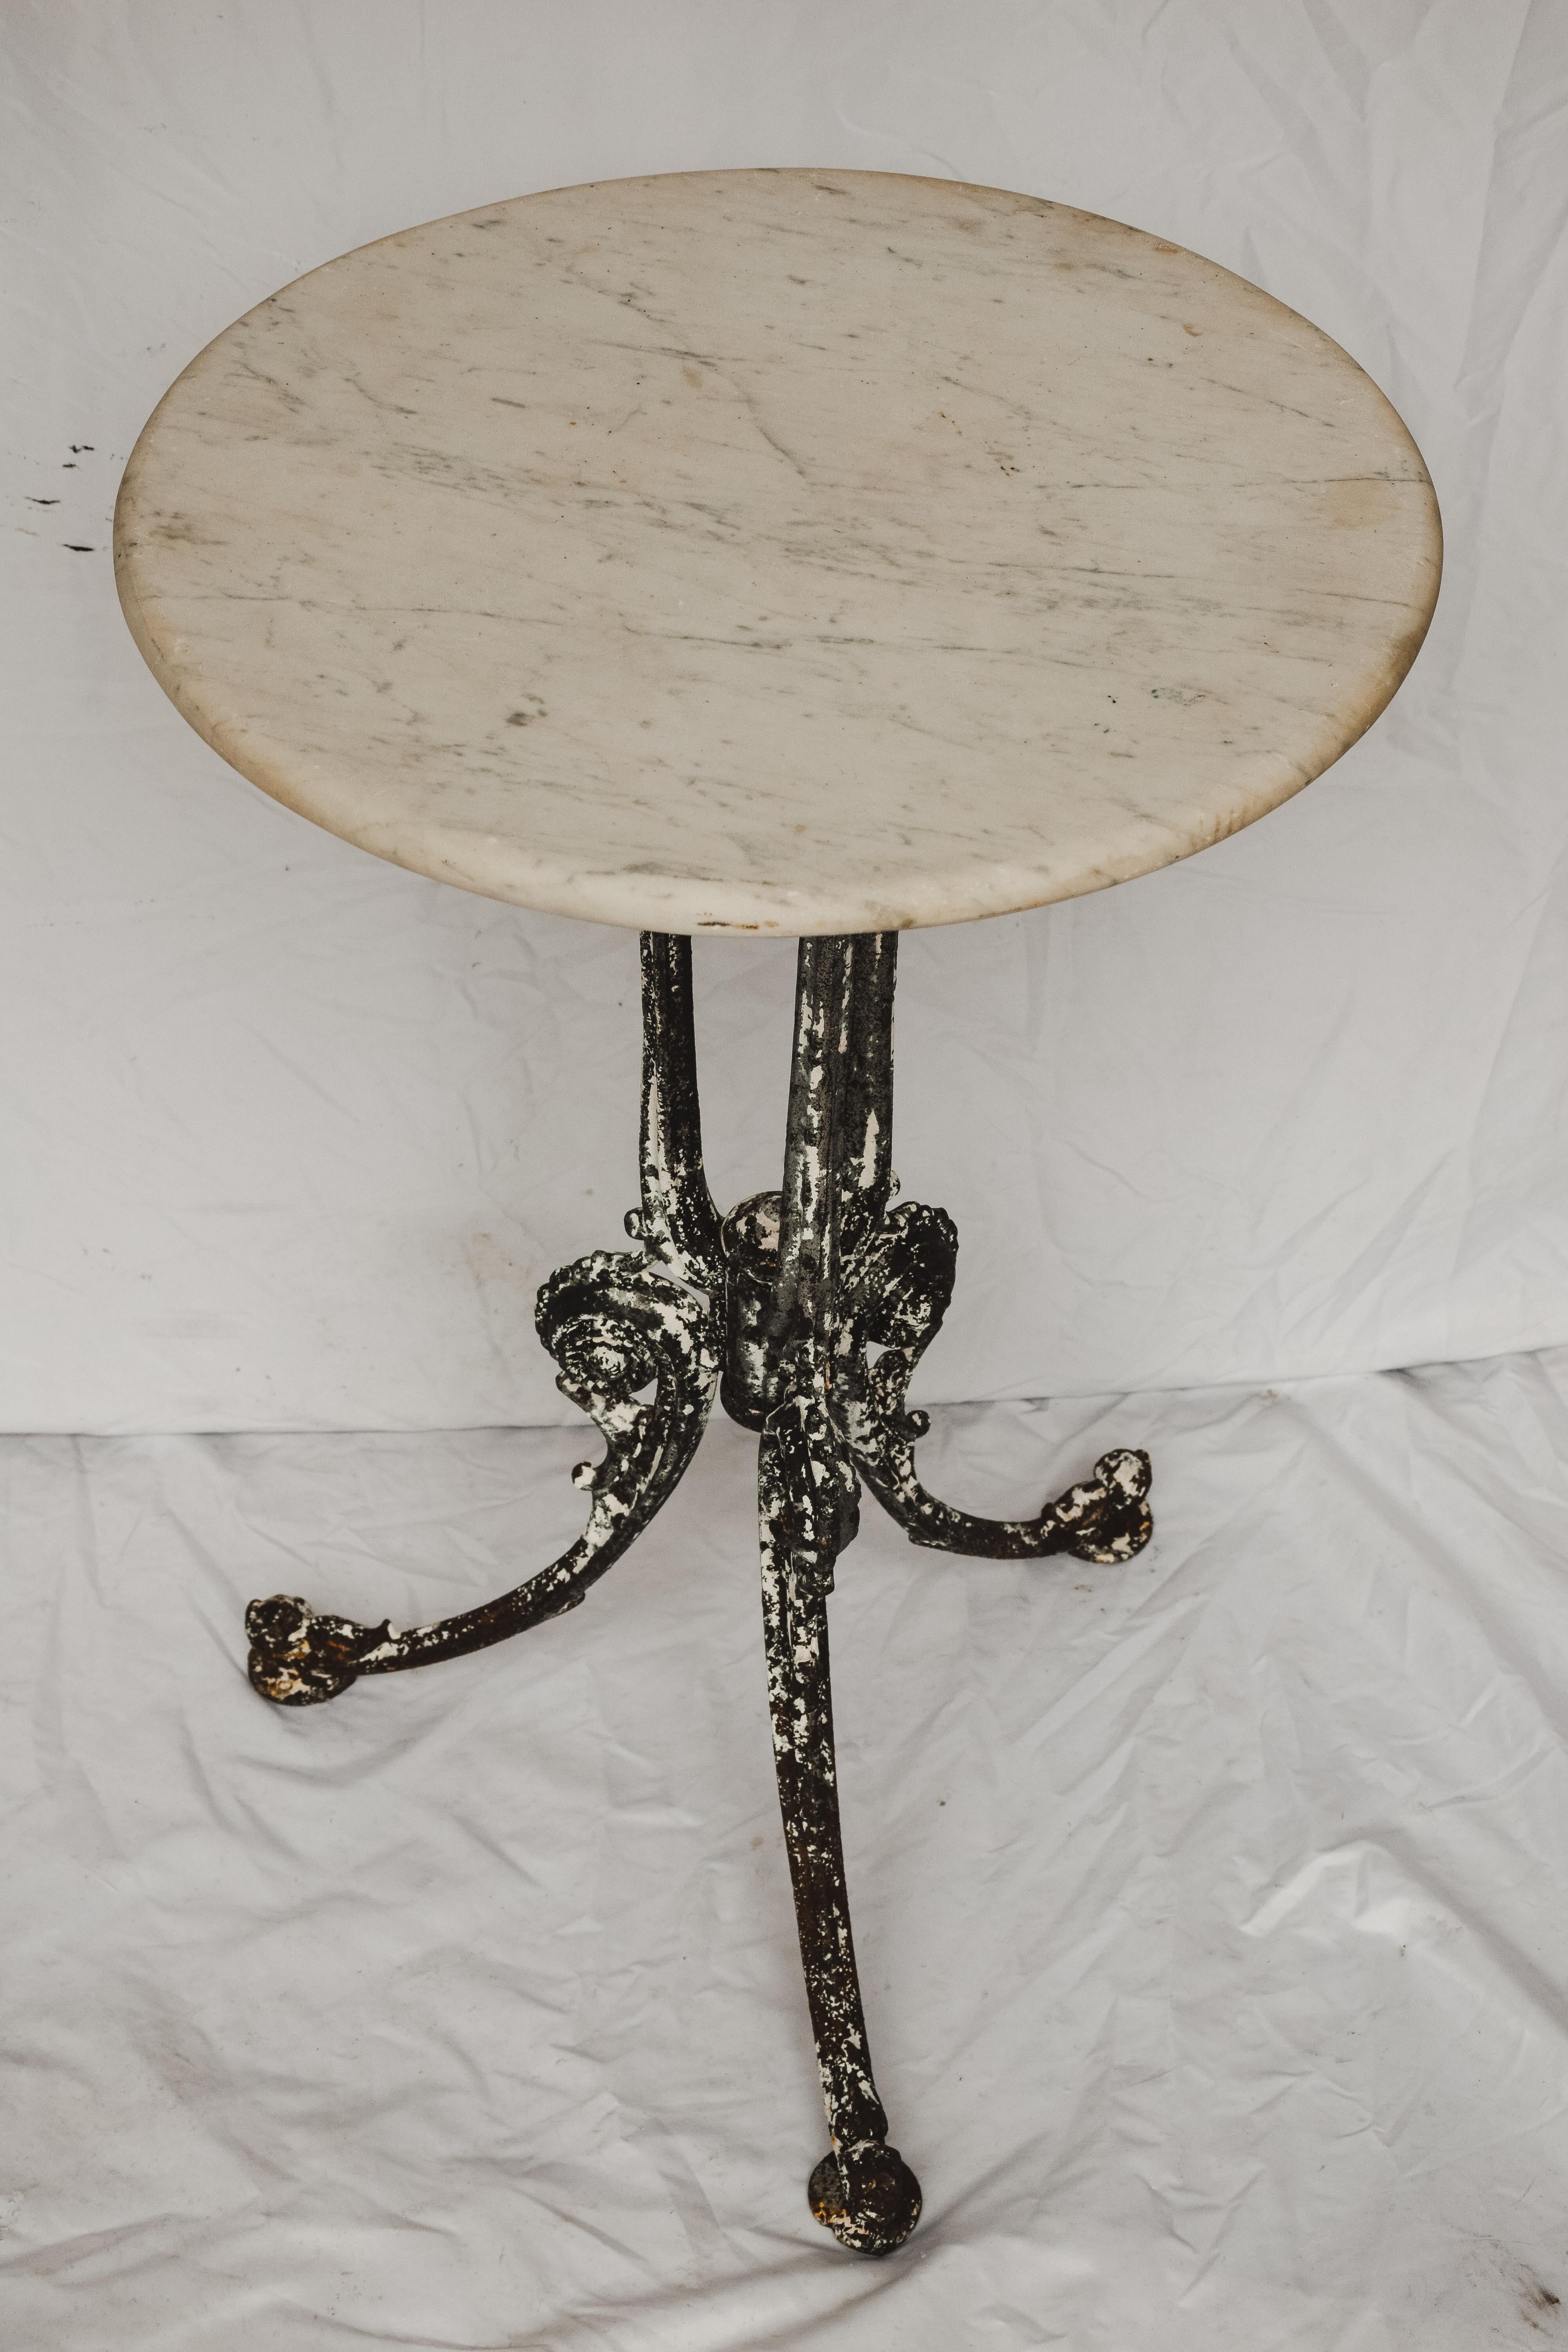 Small French Garden Table. Iron base with a black and white painted patina and a shell motif where the legs meet on the base. Would make for a charming spot to place a pot on a patio or a small table for a bathroom. 